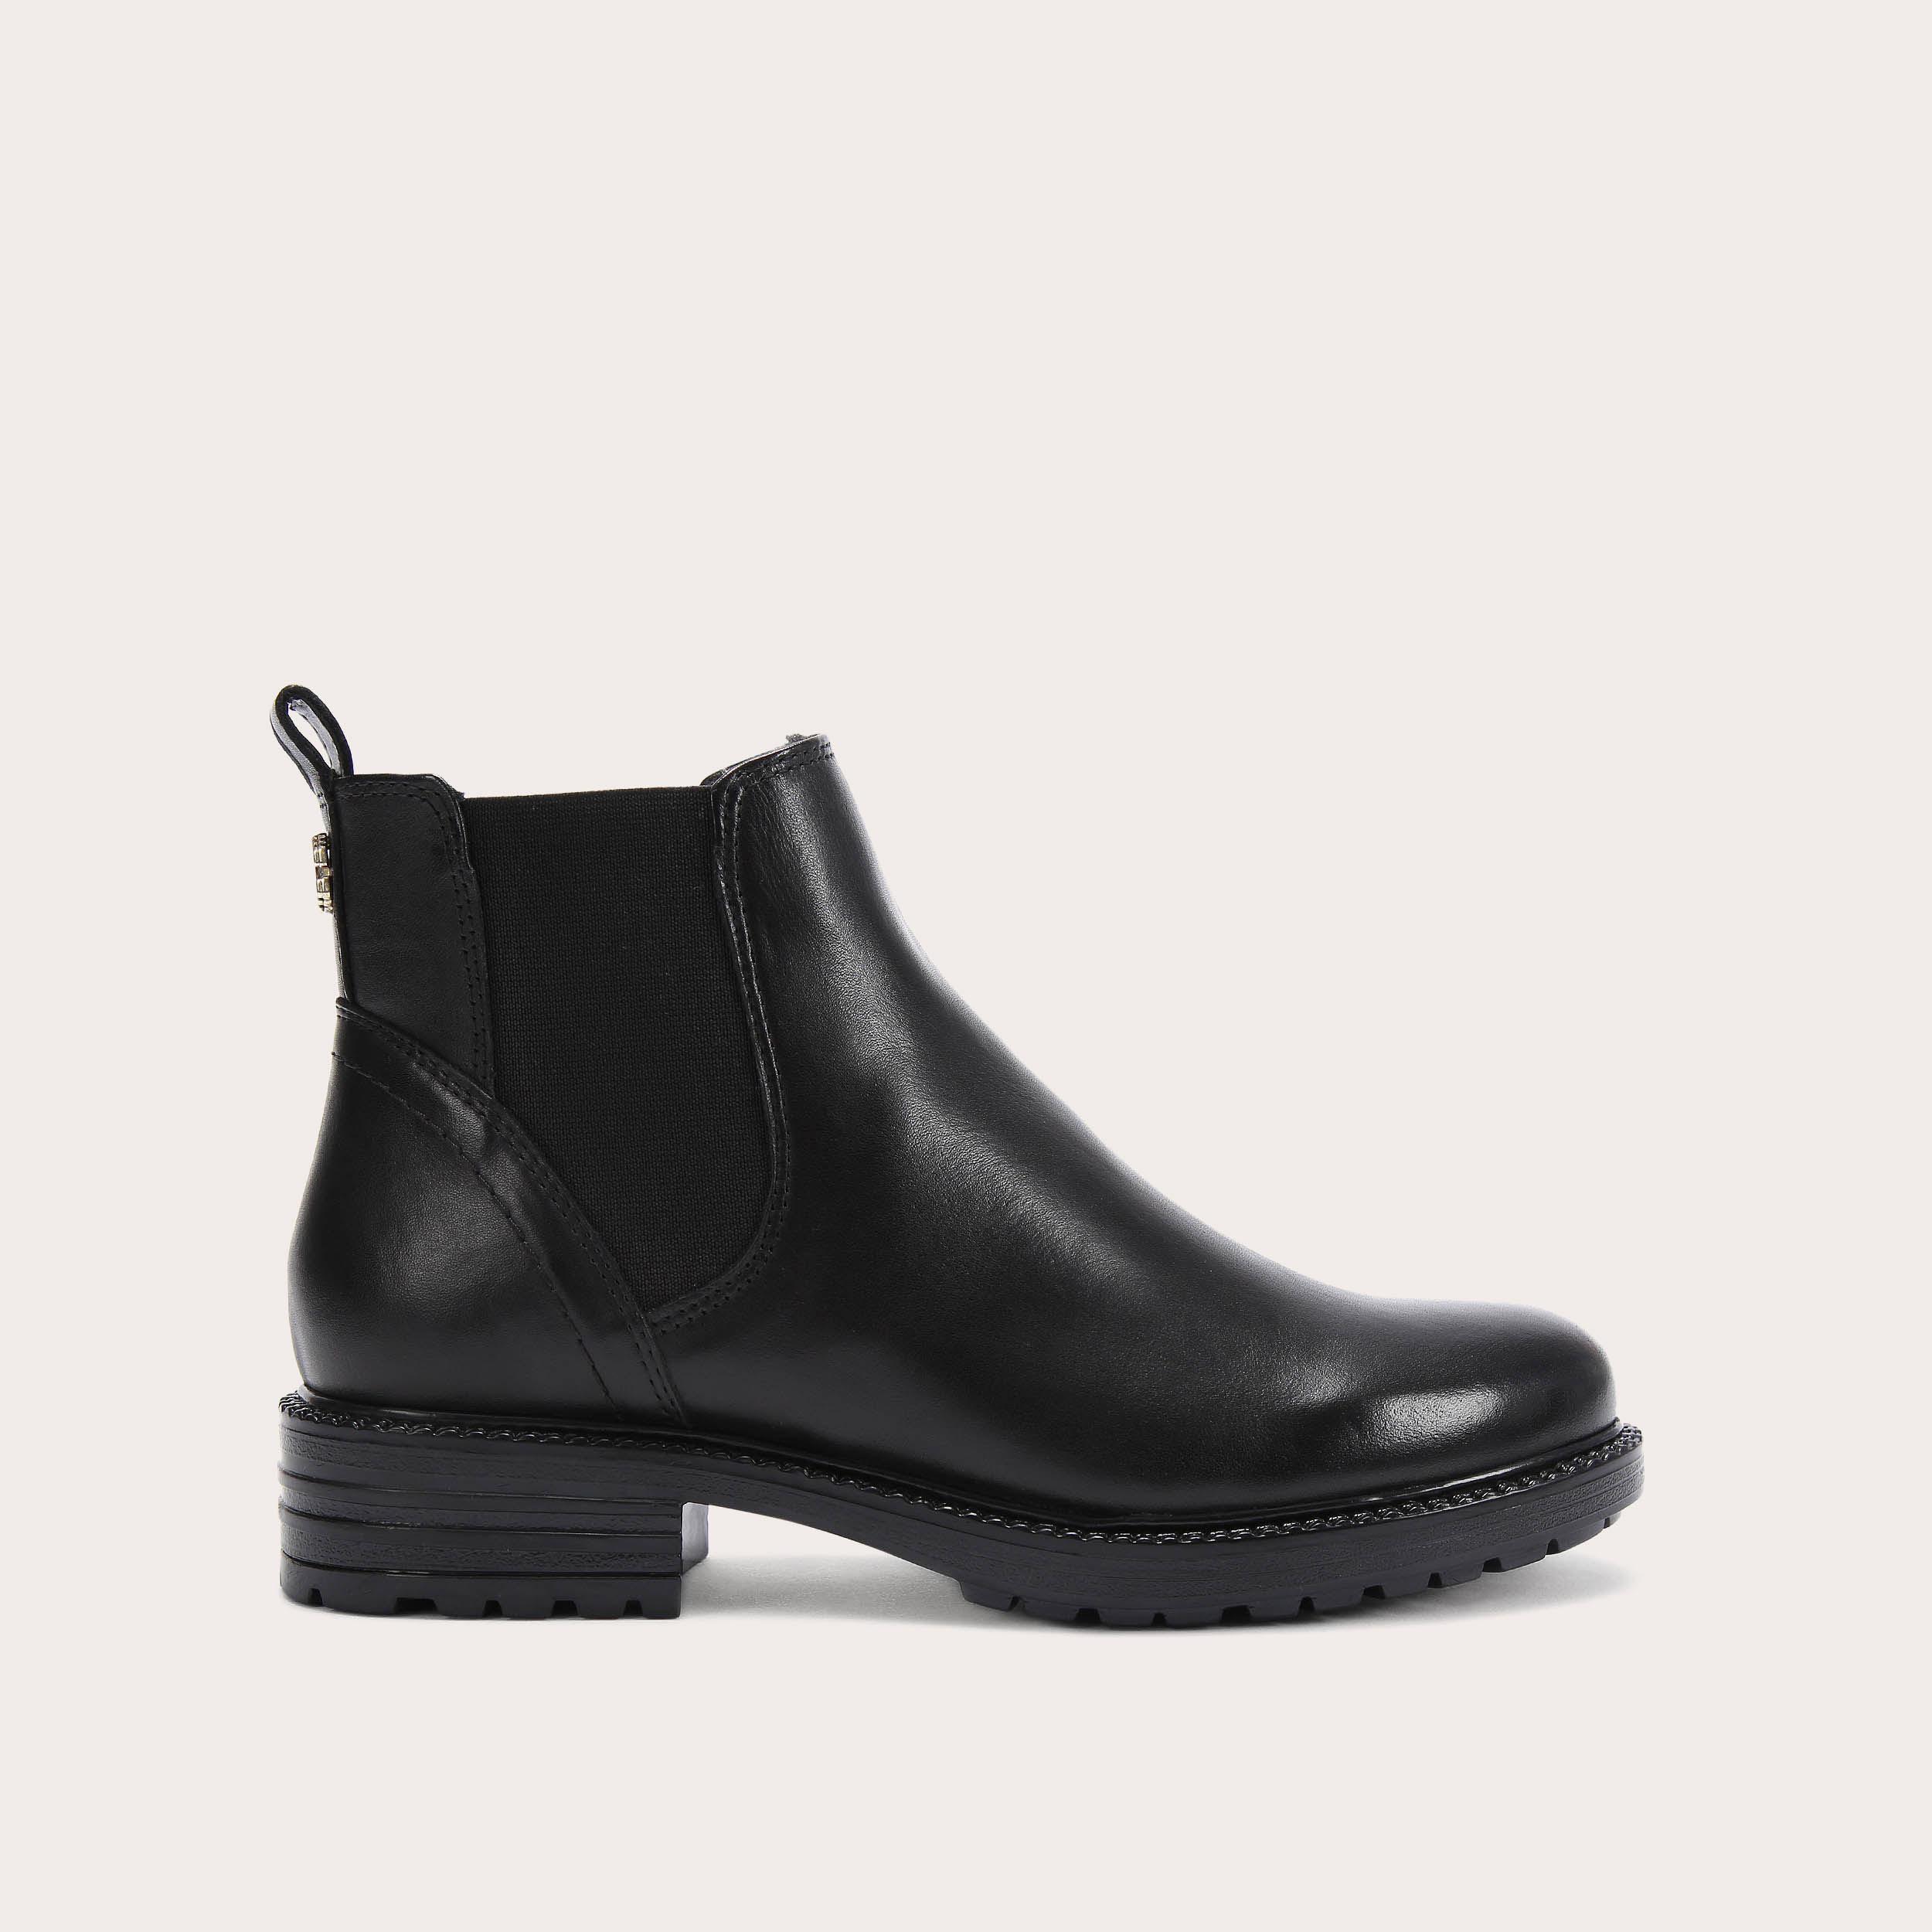 RUSS Black Leather Chelsea Boots by CARVELA COMFORT